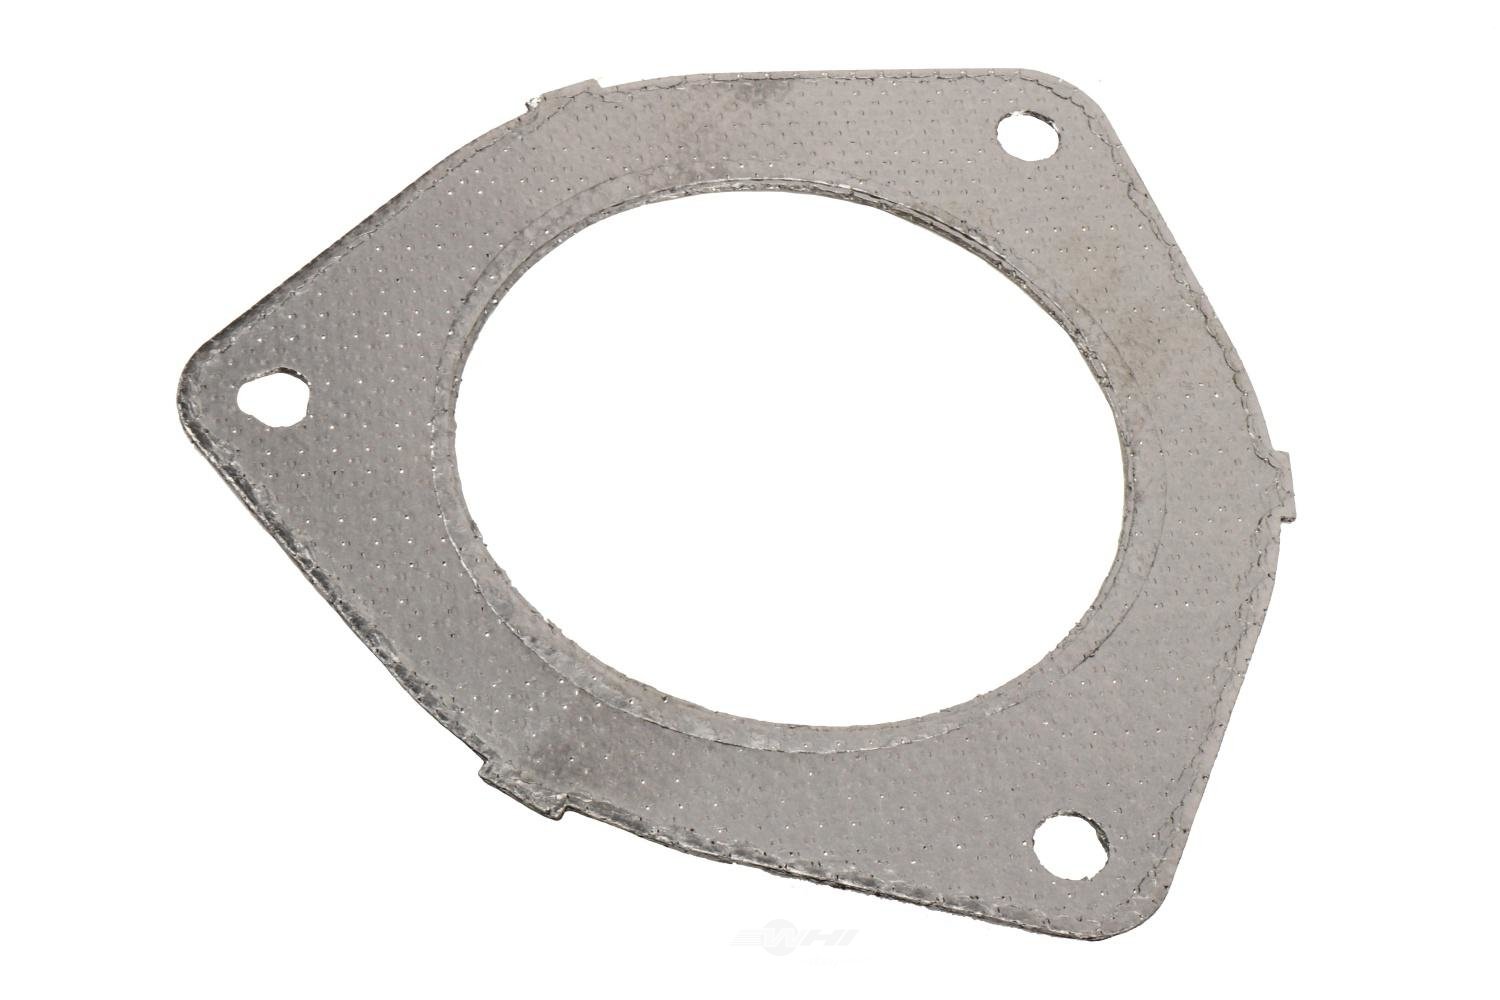 GM GENUINE PARTS CANADA - Exhaust Pipe to Manifold Gasket - GMC 15876234